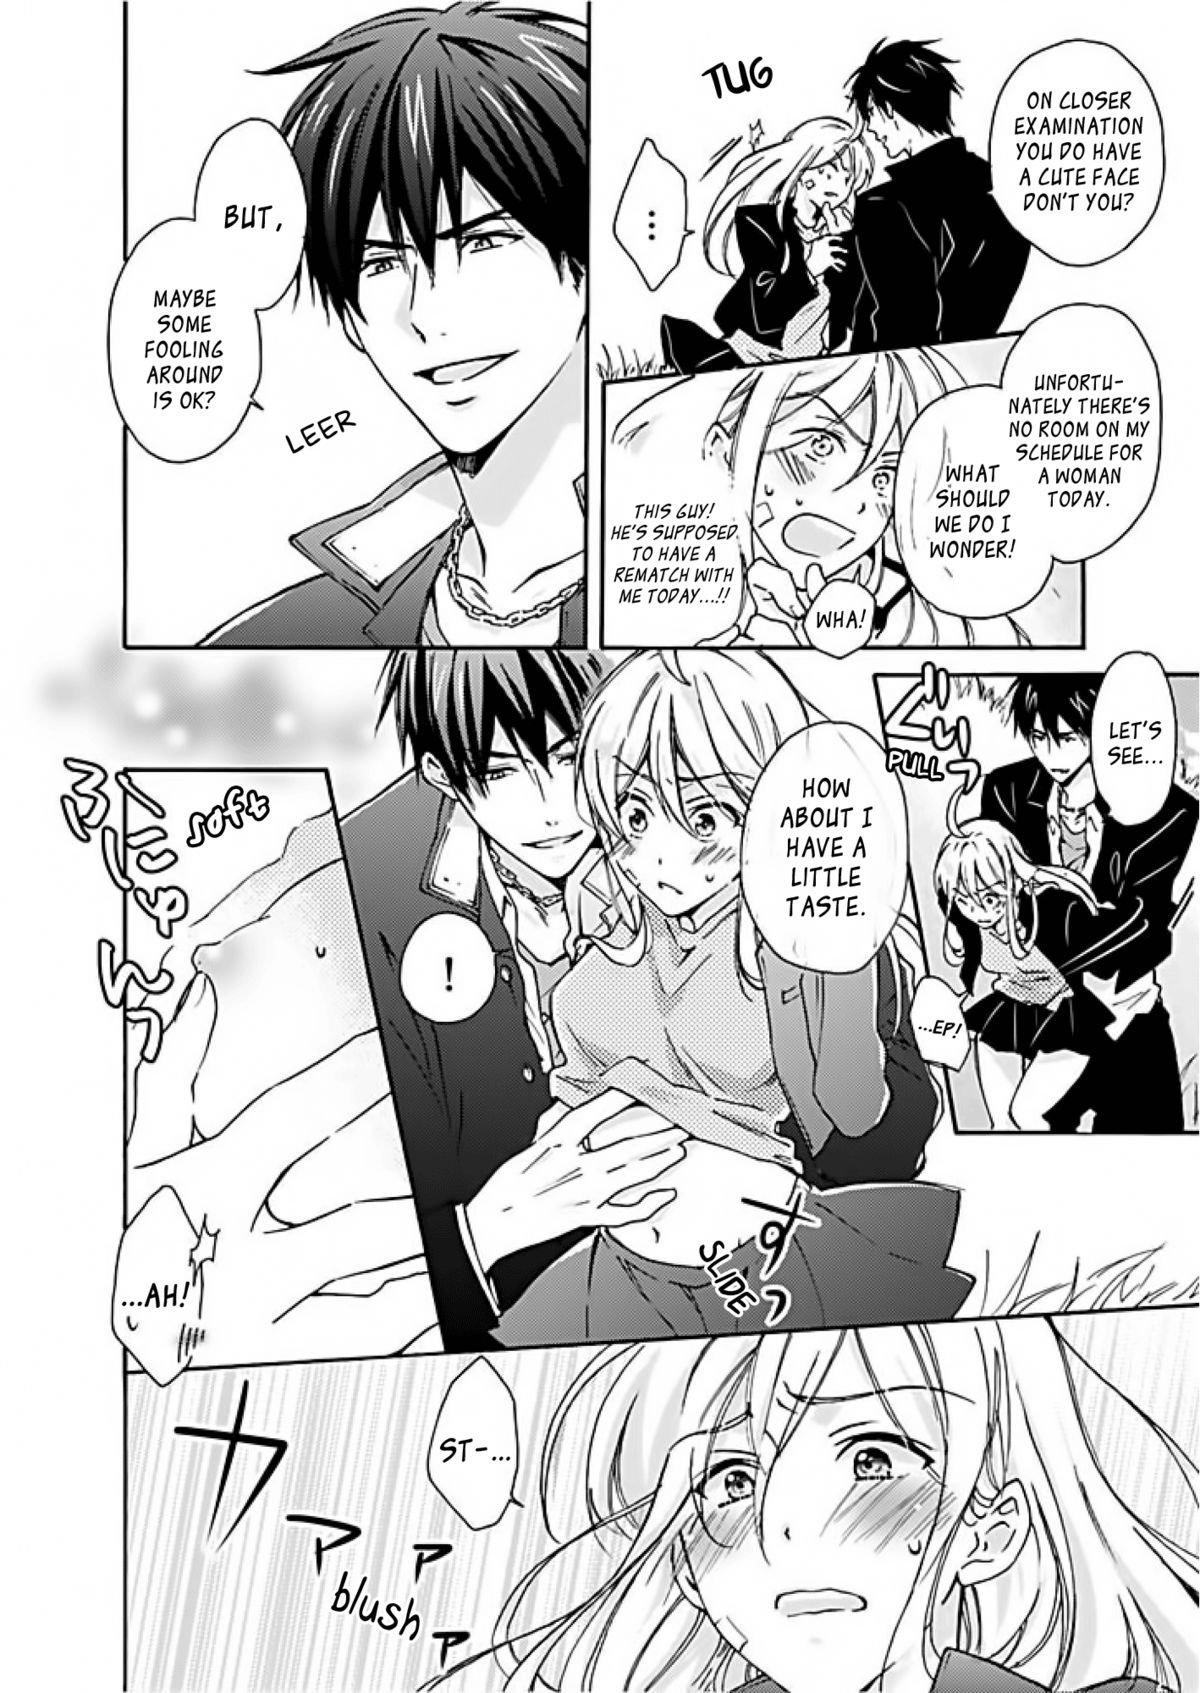 [Takao Yori] Genderbender Yankee School ☆ They're Trying to Take My First Time. [English] page 7 full